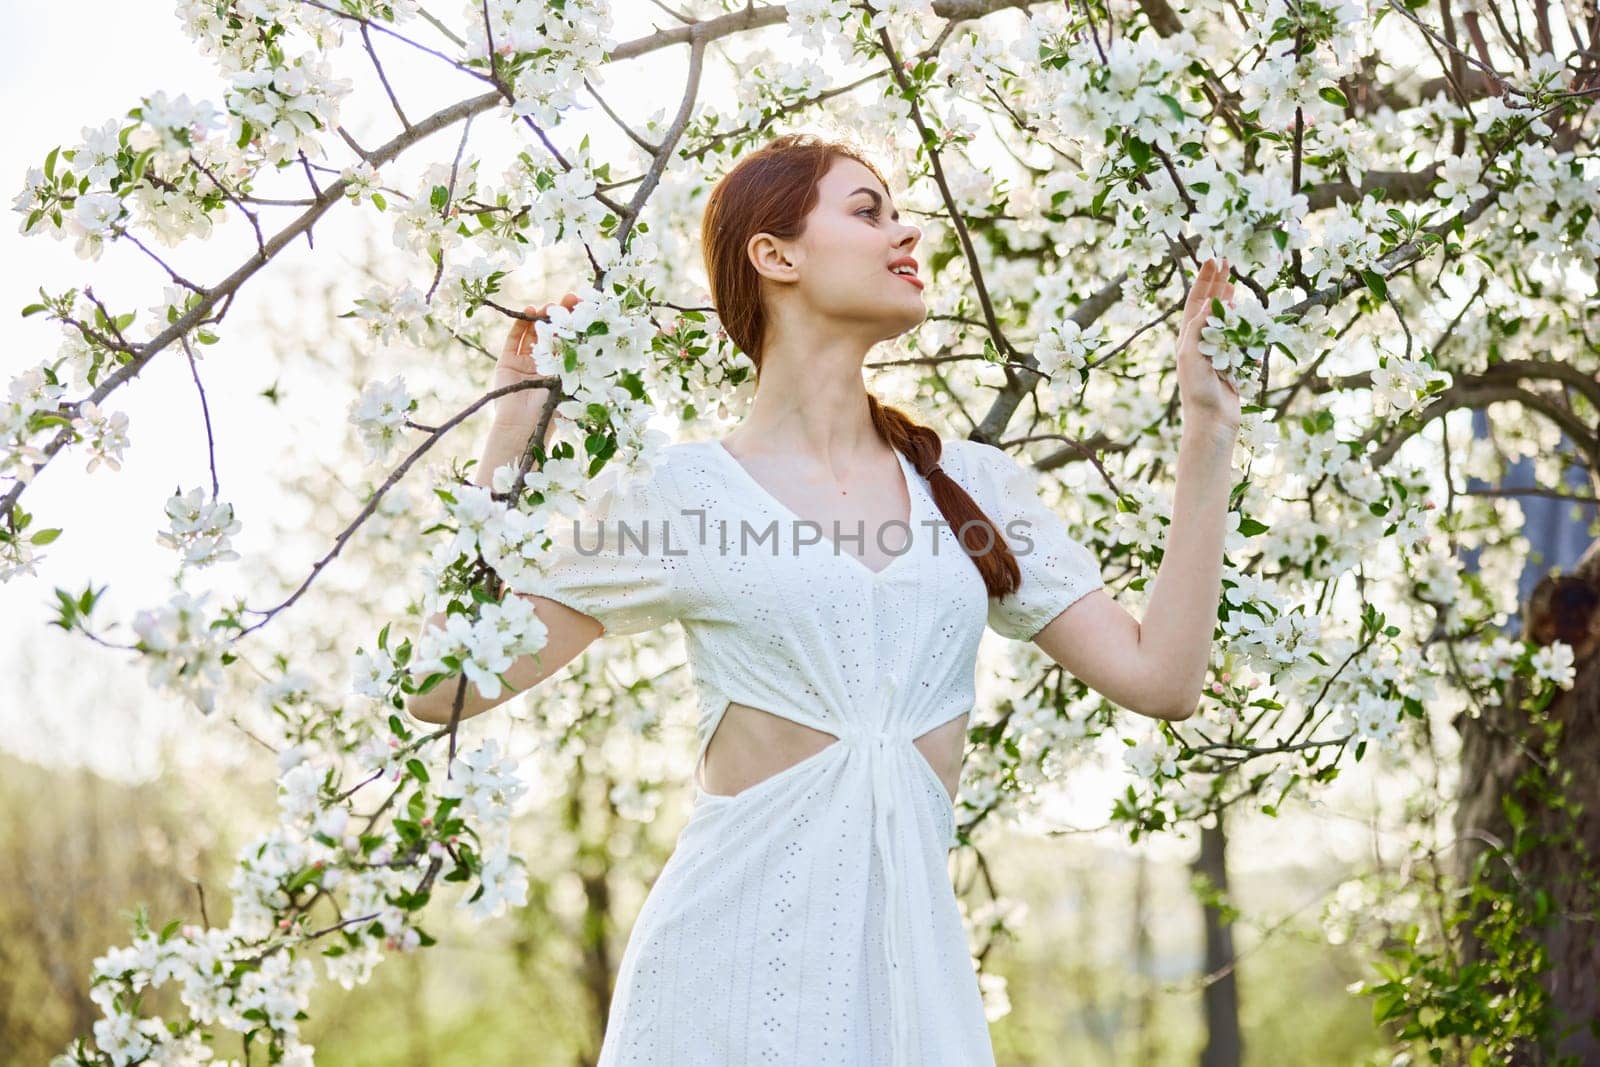 a slender, happy woman in a light dress poses next to a flowering tree in the countryside. High quality photo